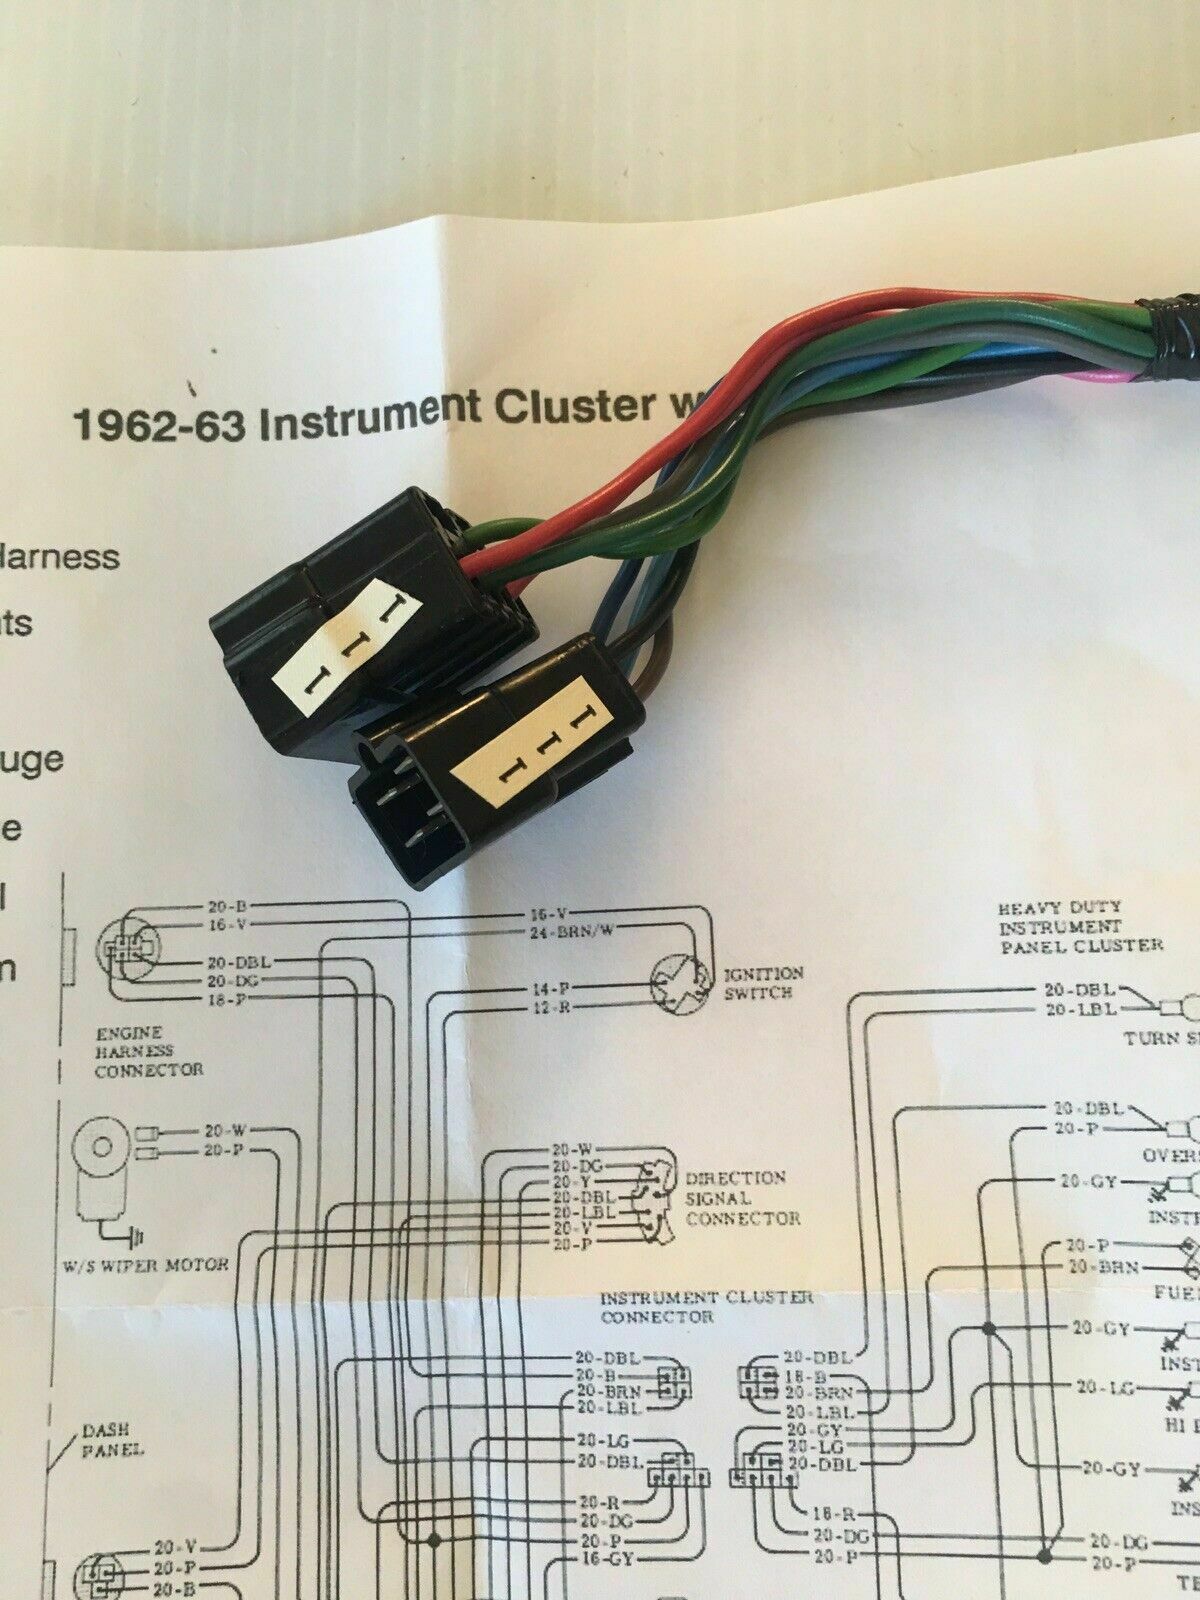 Wiring Harnesses: 1962 - 1963 Chevy Pick Up Truck Dash Instrument Cluster Wiring Harness Gauges